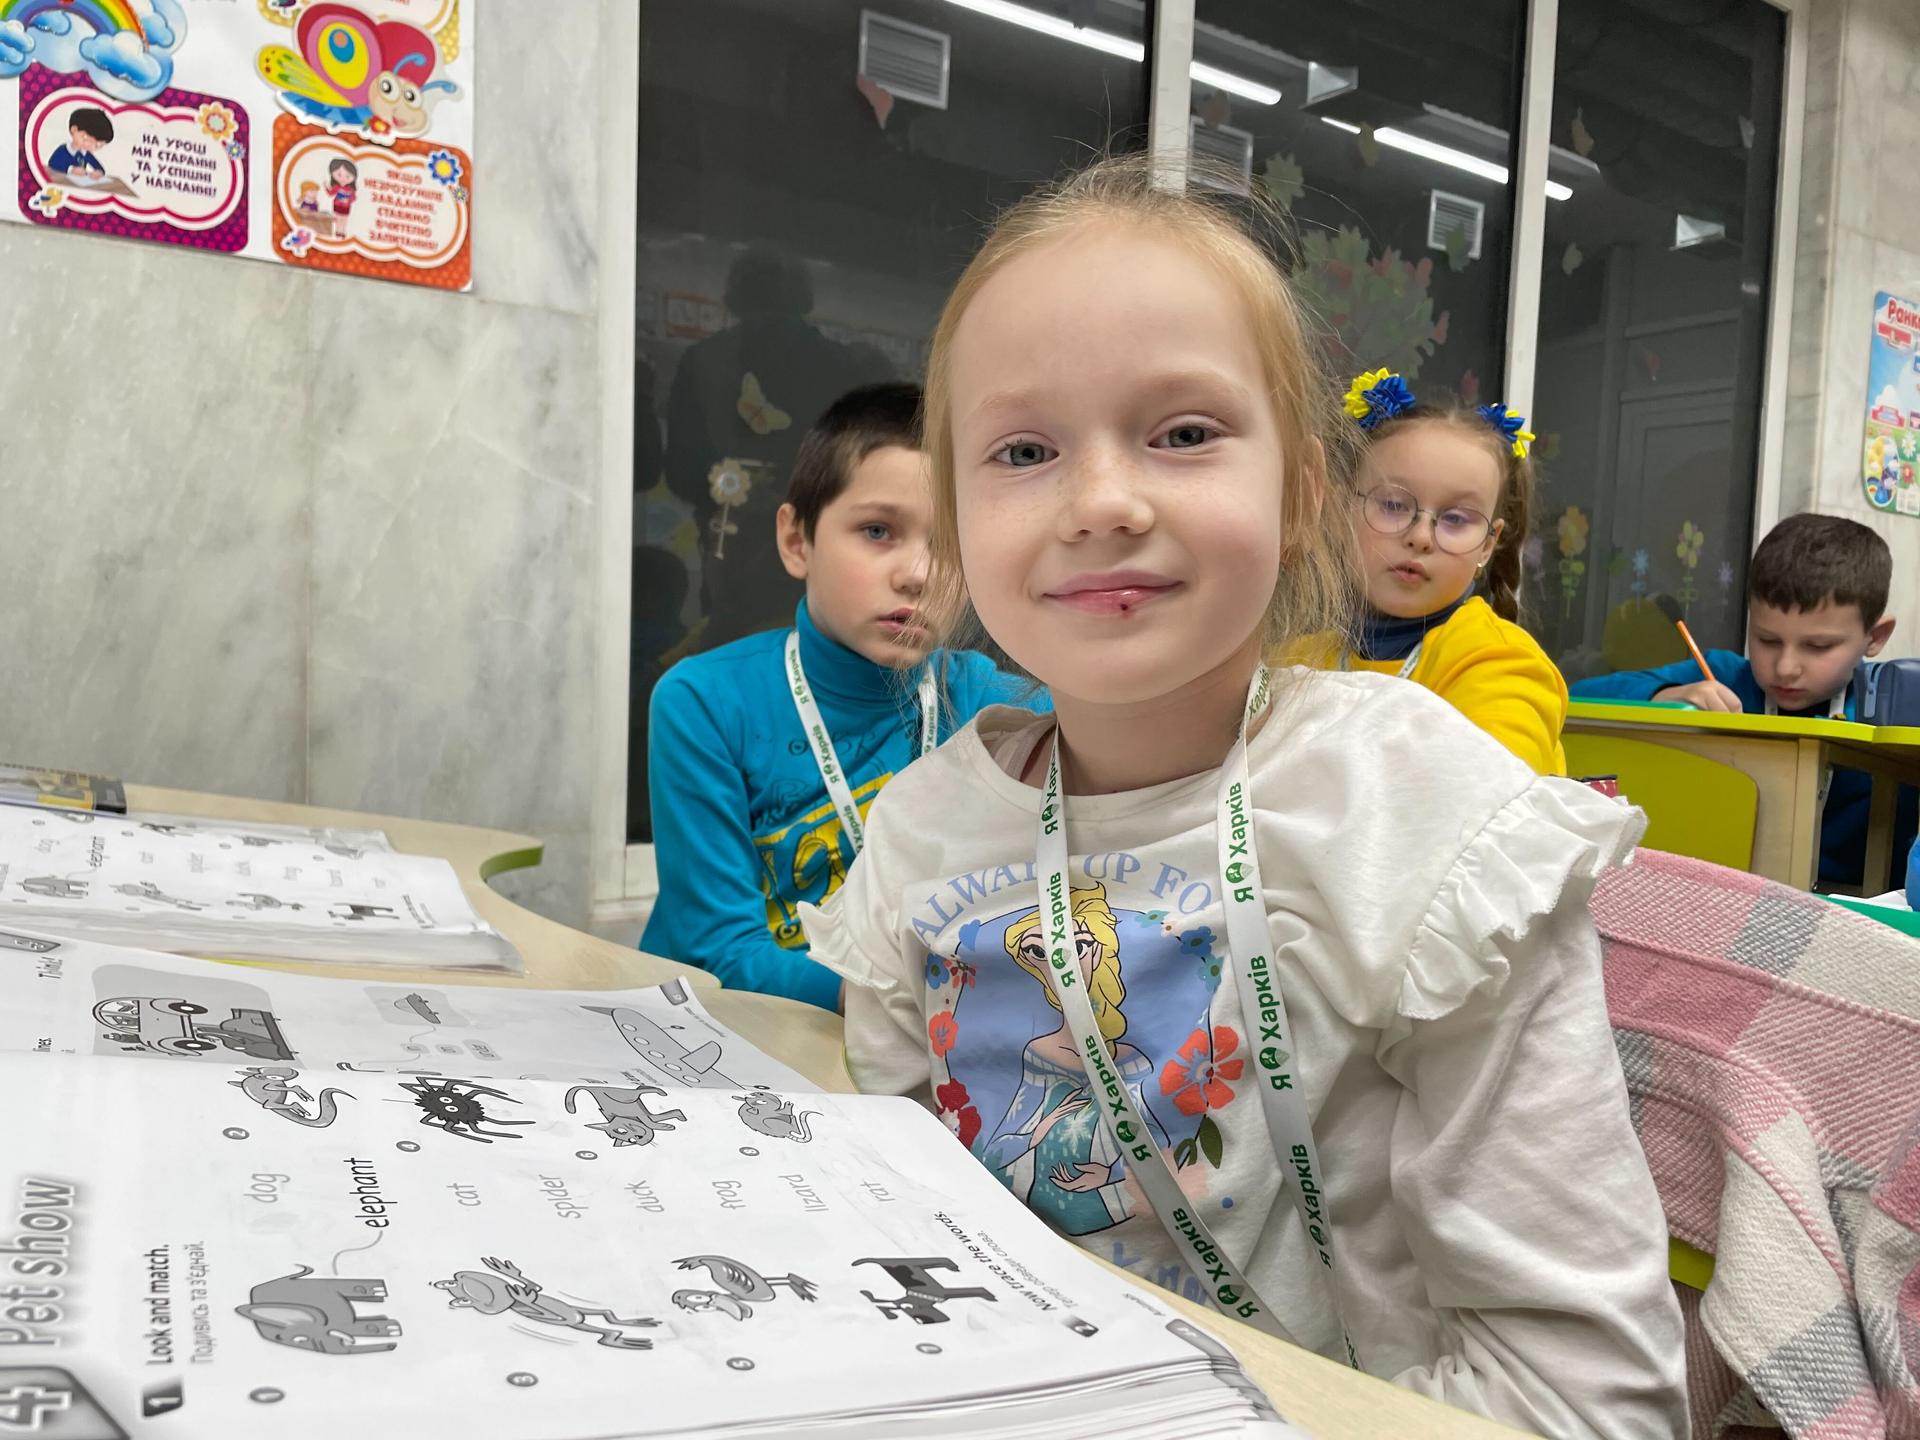 Katya Rybalka smiles as she attends an English language class in the Kharkiv metro underground.